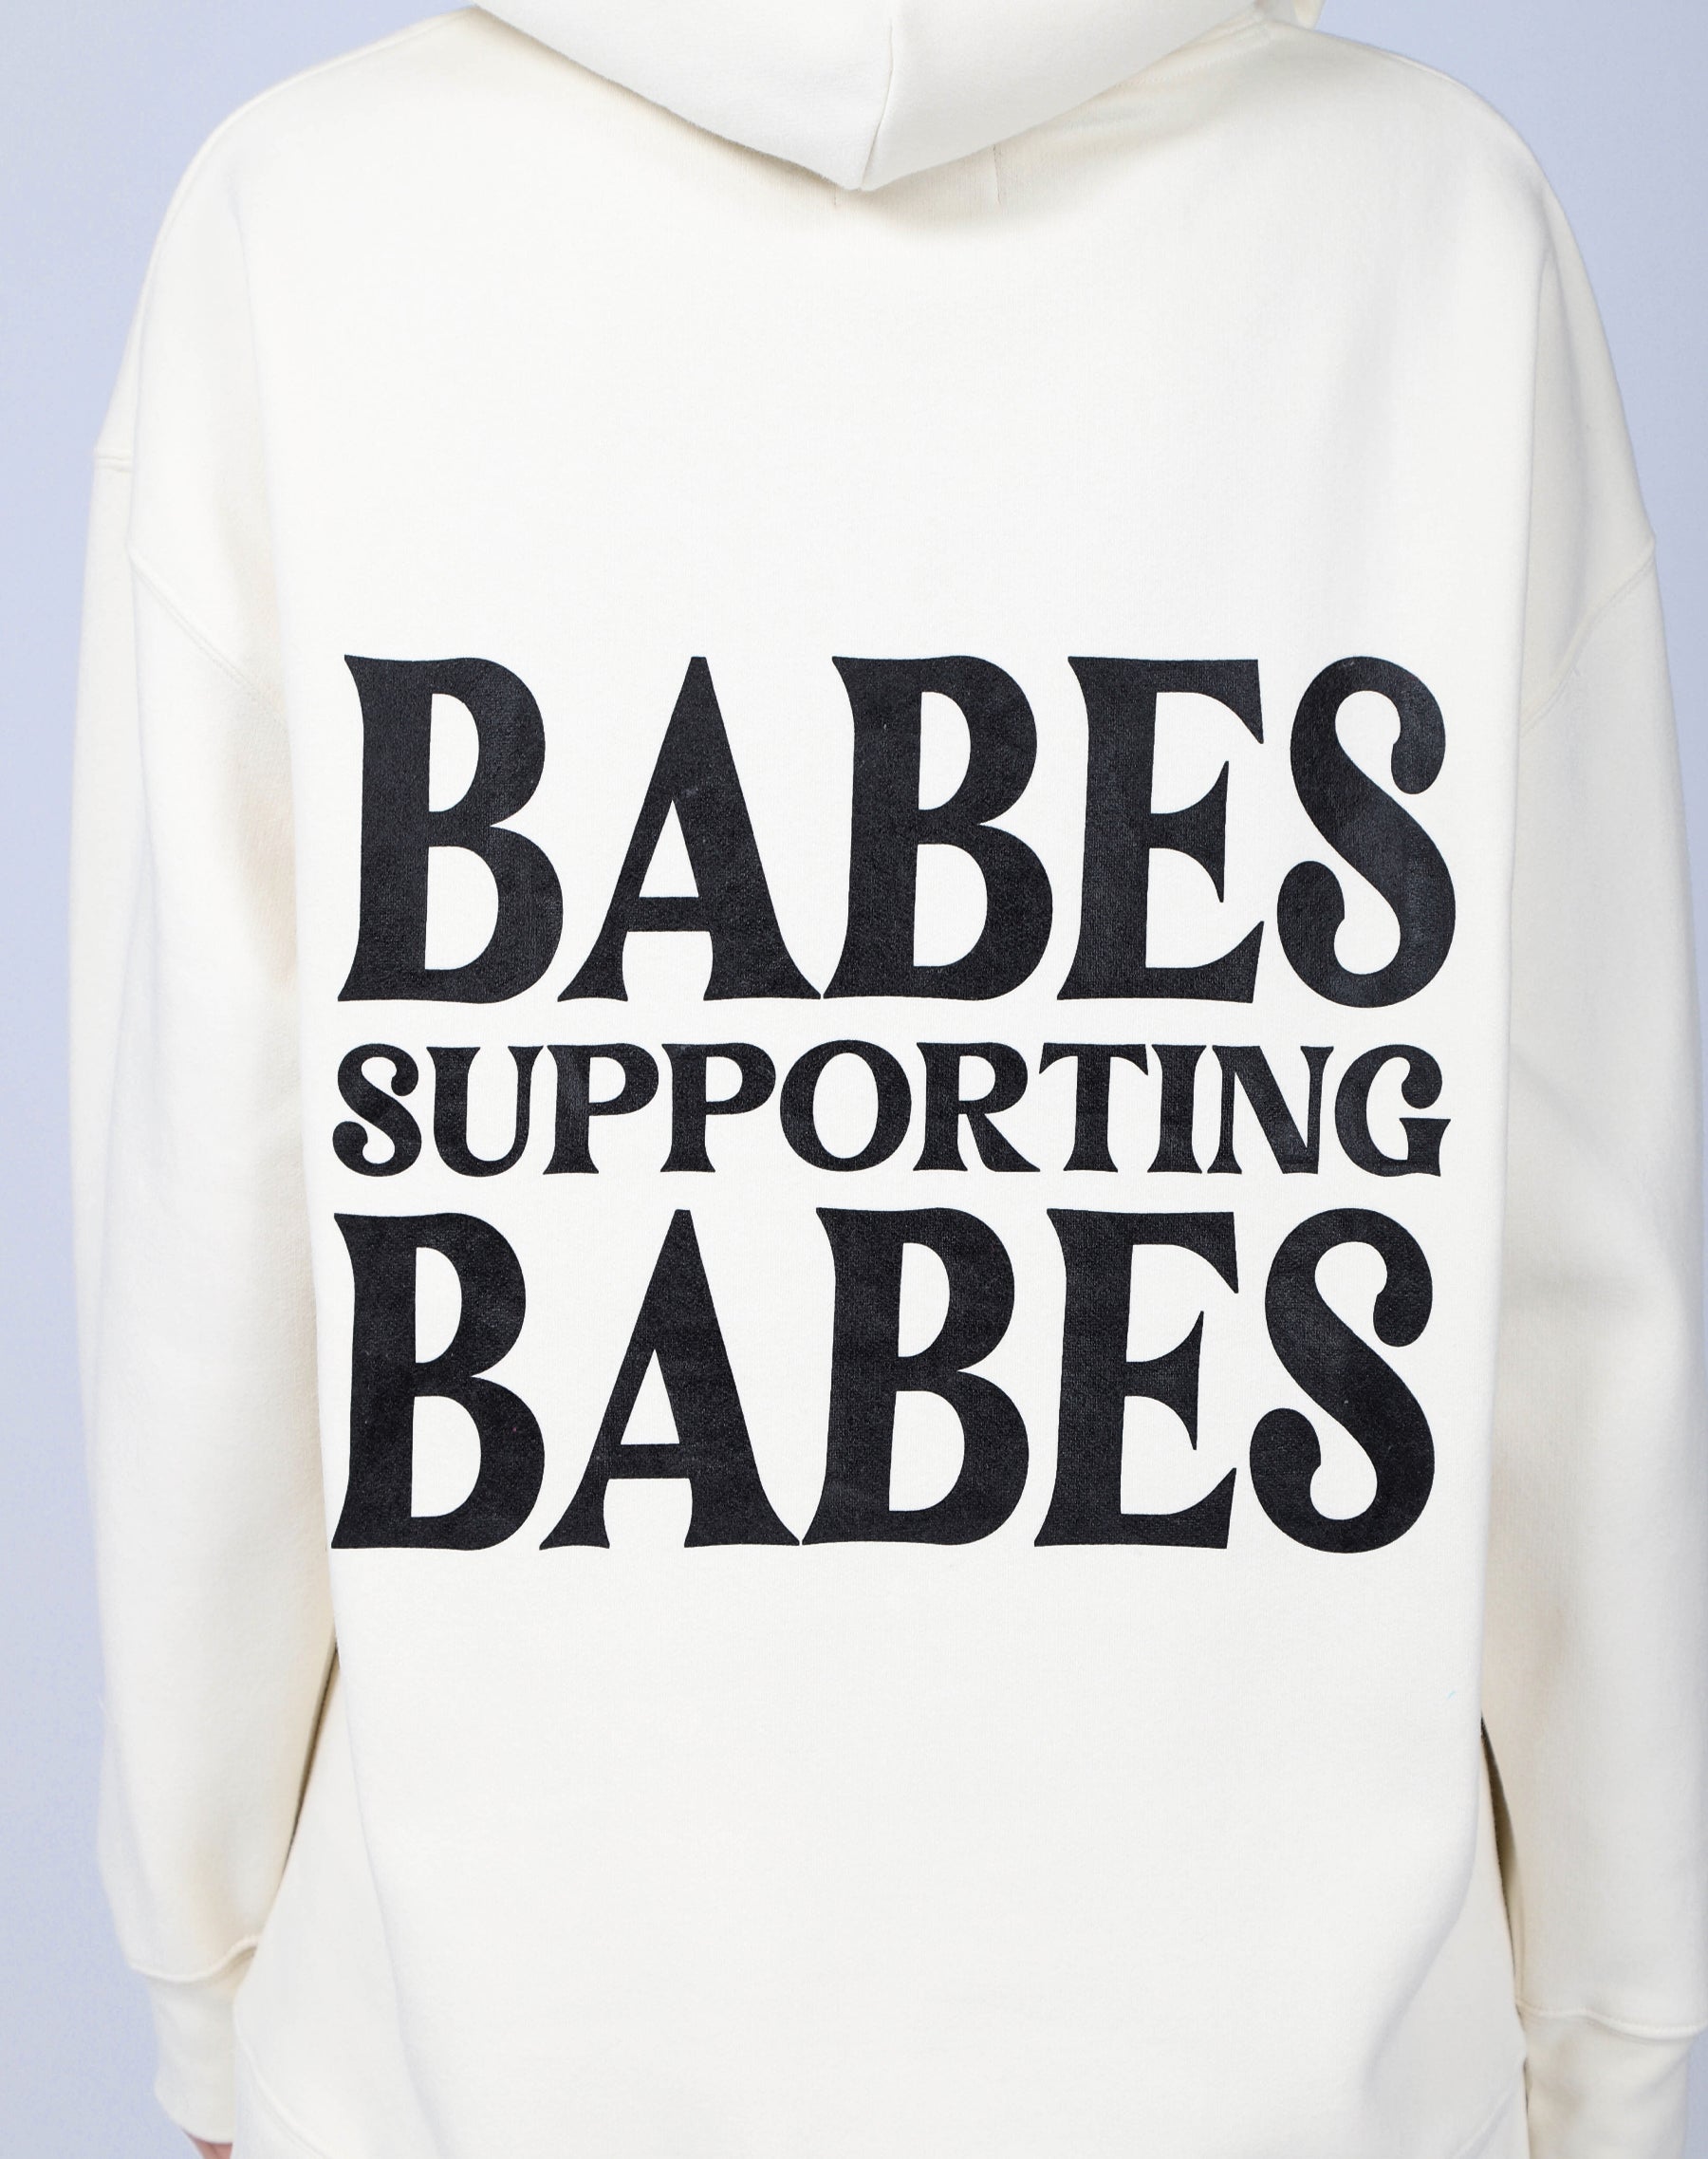 The "BABES SUPPORTING BABES" Big Sister Hoodie | Almond Milk